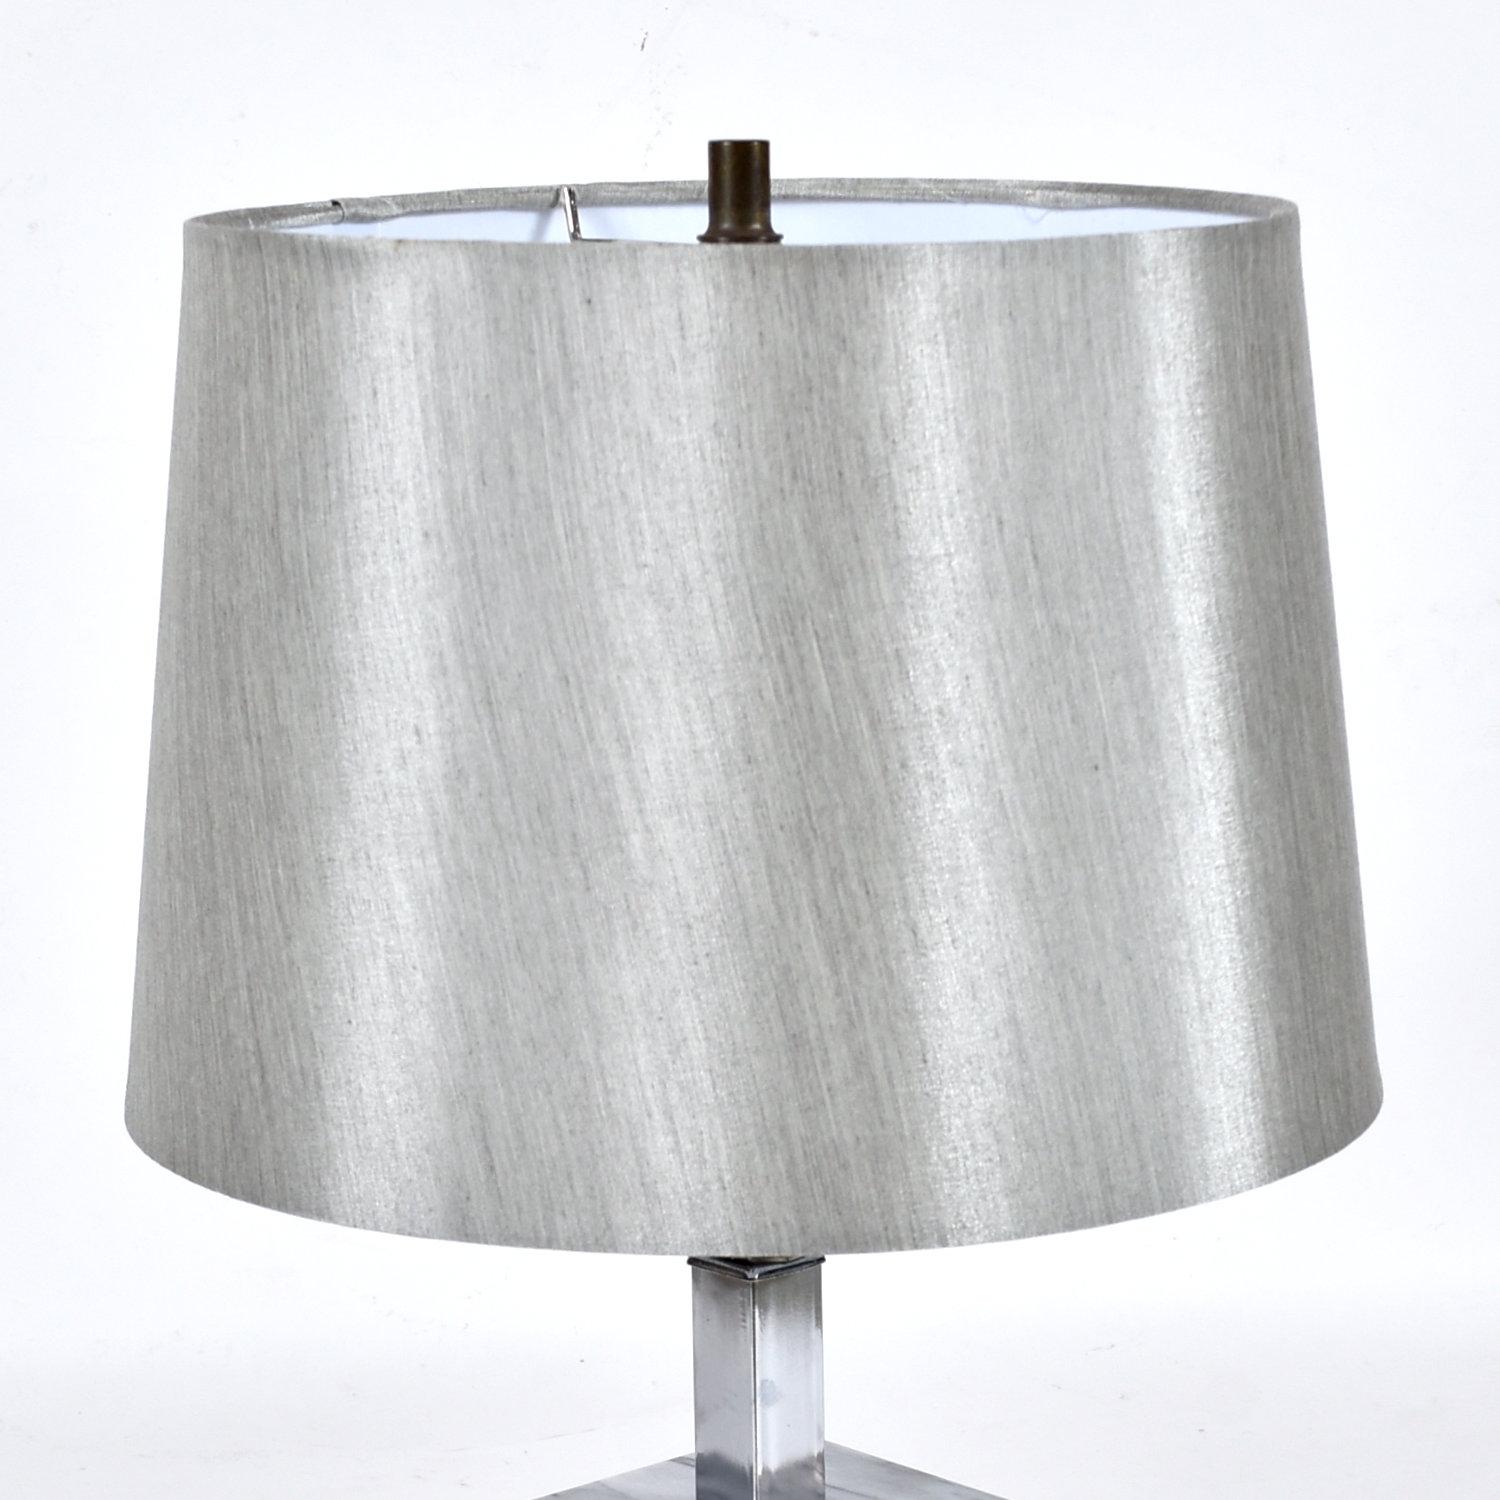 Nessen Style Gray Marble Table Lamp with Chrome Neck and Silver Shade In Good Condition For Sale In Chattanooga, TN